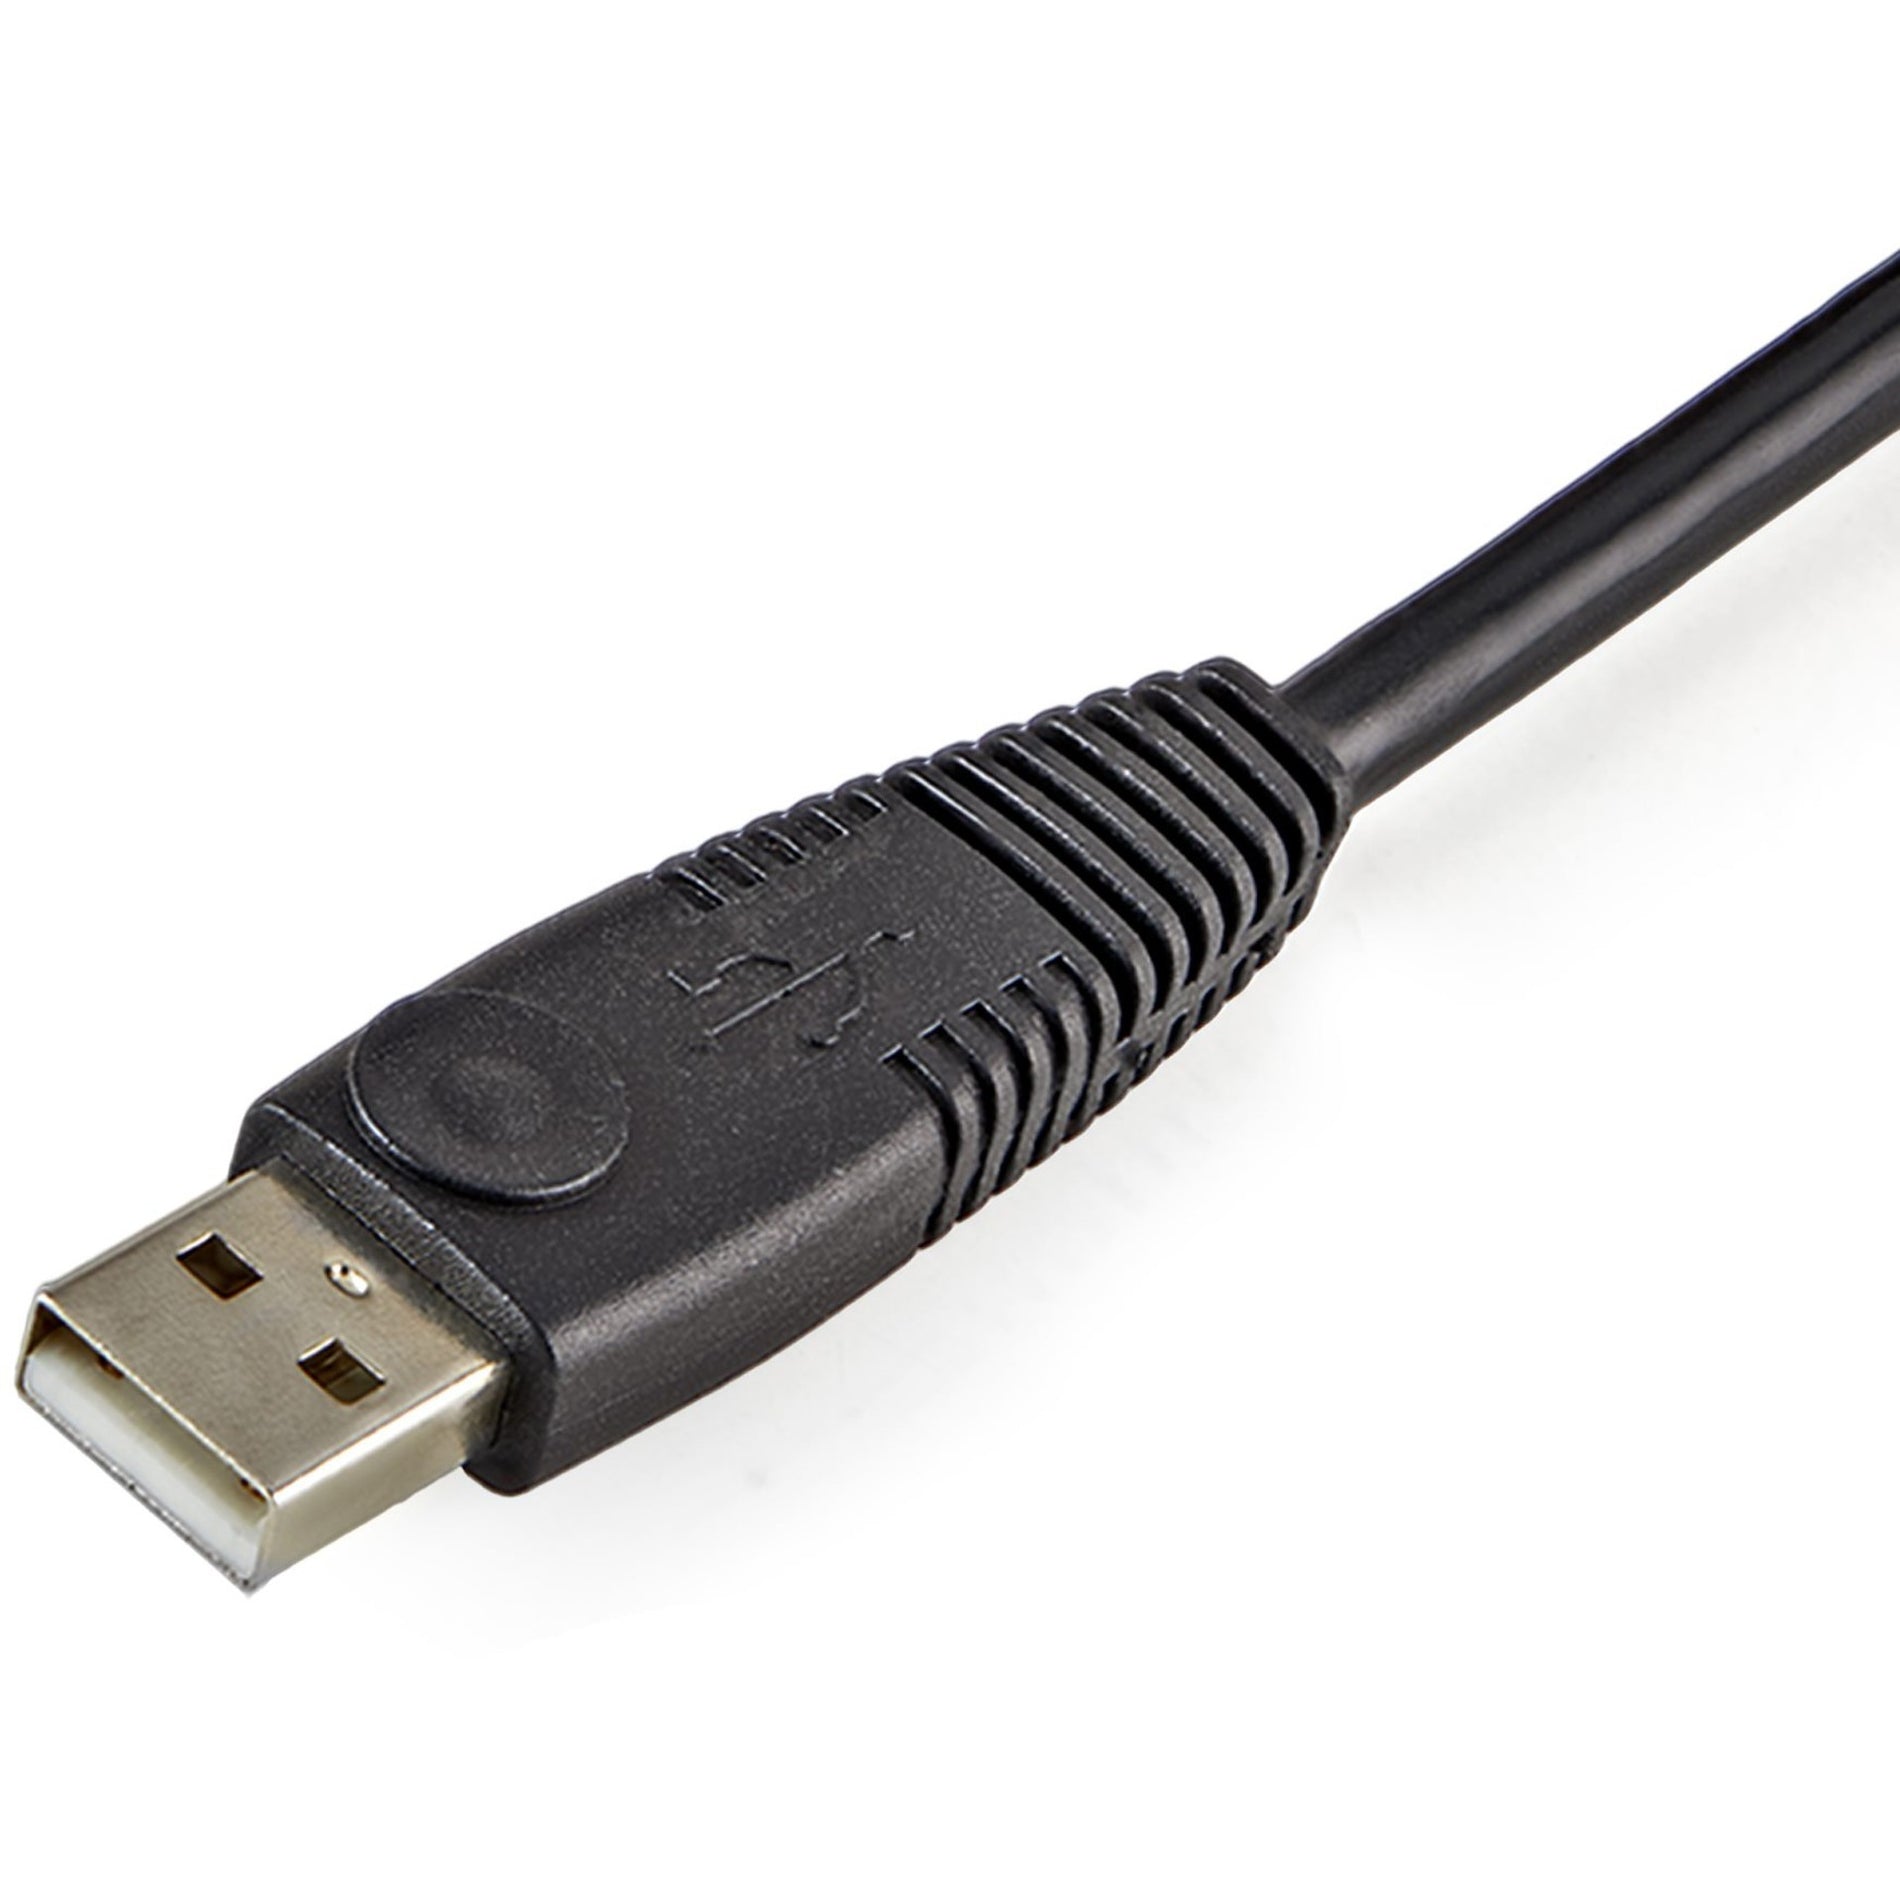 StarTech.com USBDVI4N1A10 10 ft 4-in-1 USB DVI KVM Cable with Audio, Copper Conductor, 1920 x 1200 Supported Resolution, Black